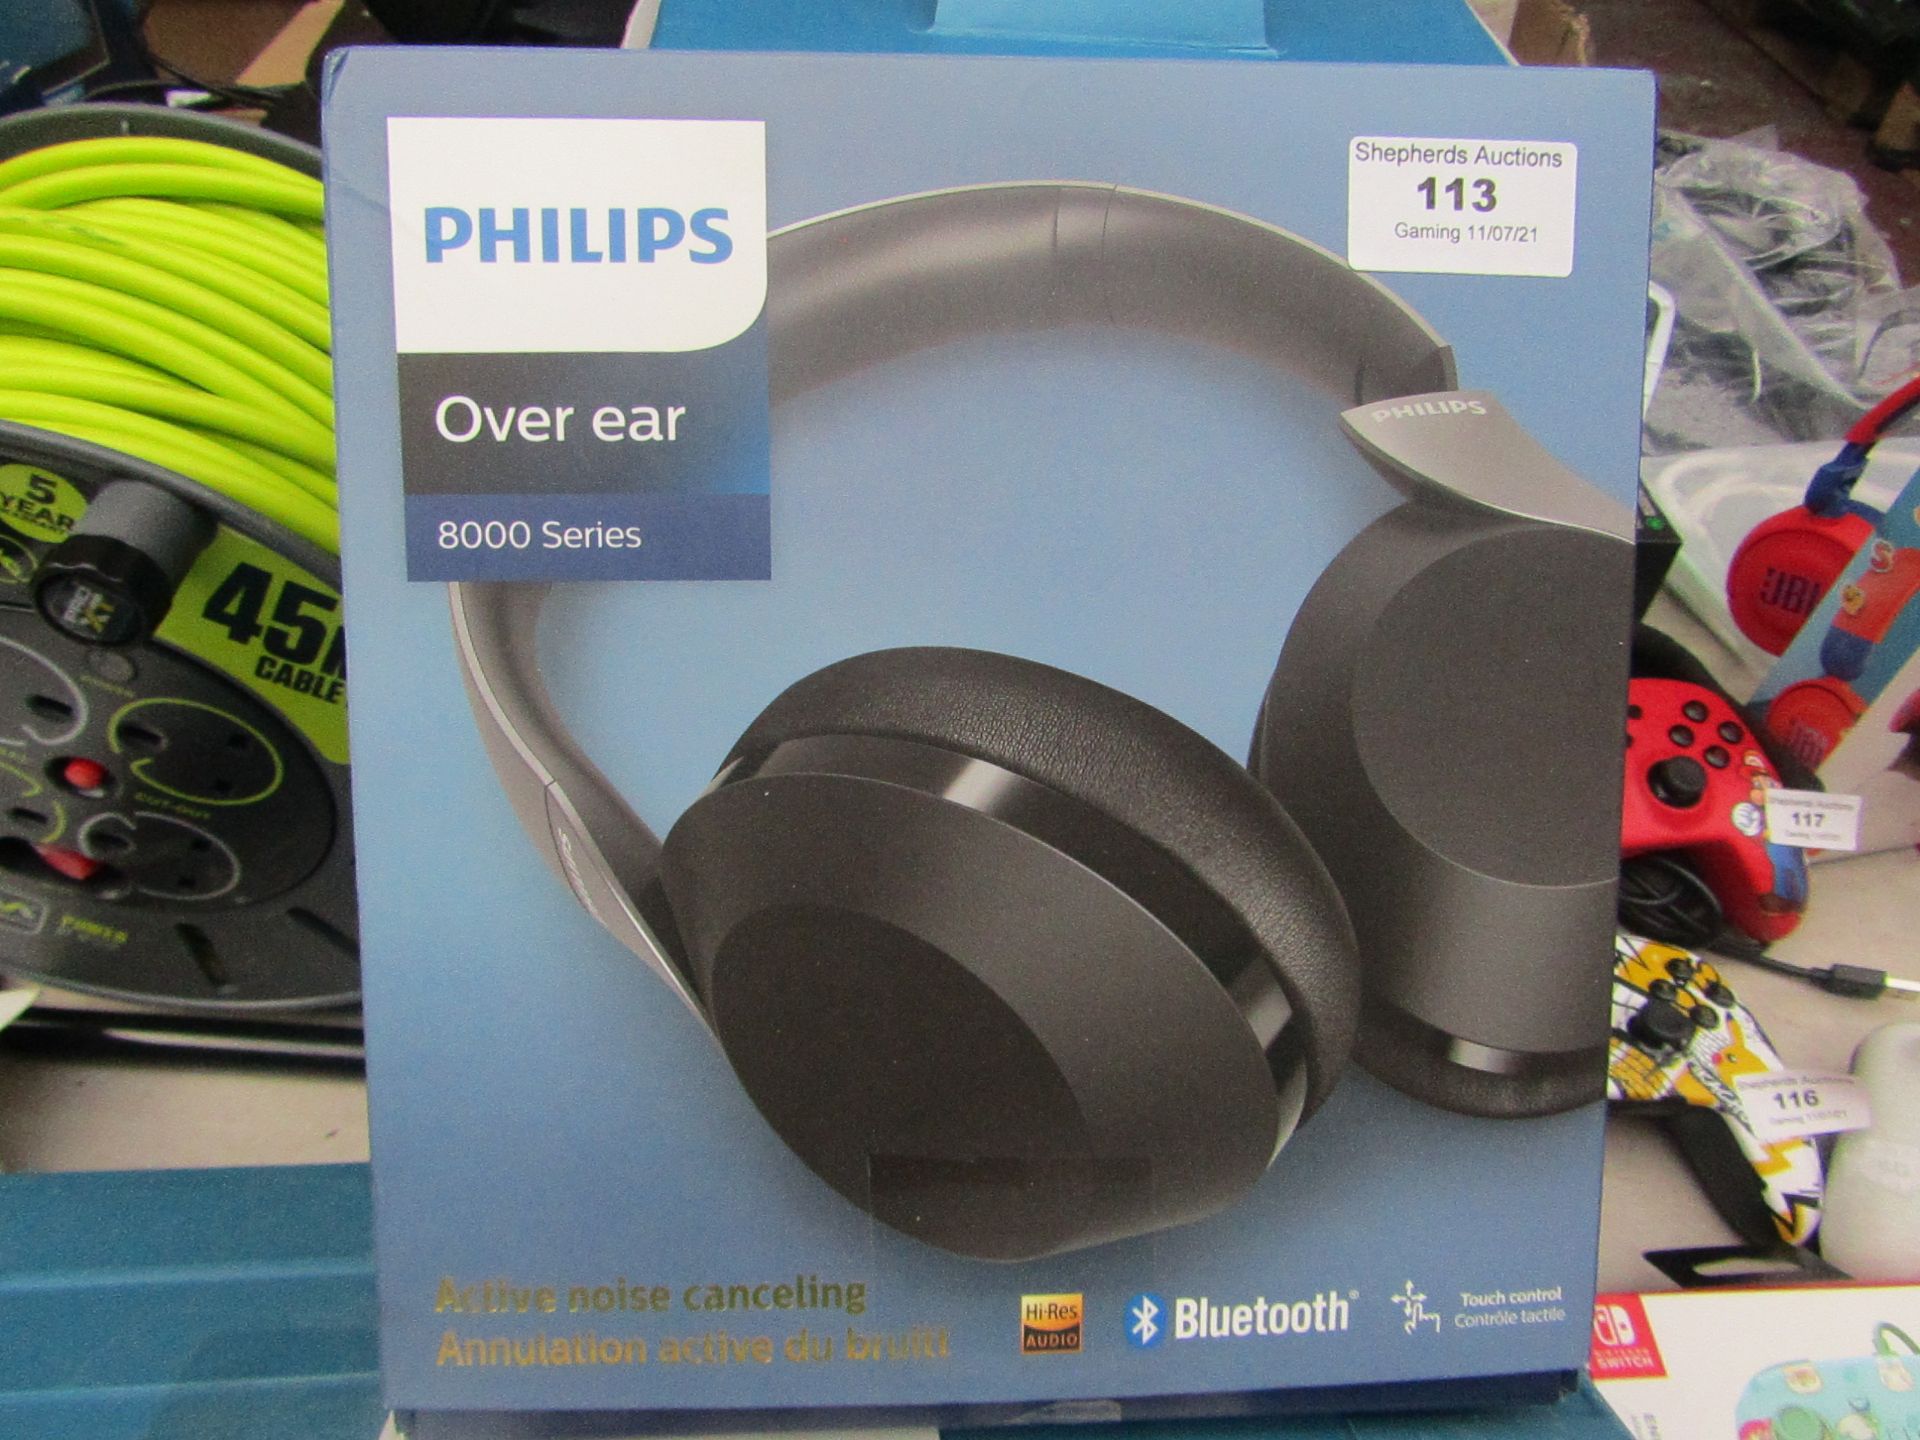 Phillips Over Ear 8000 Series Wireless headphones - Tested Working & Boxed - RRP £100